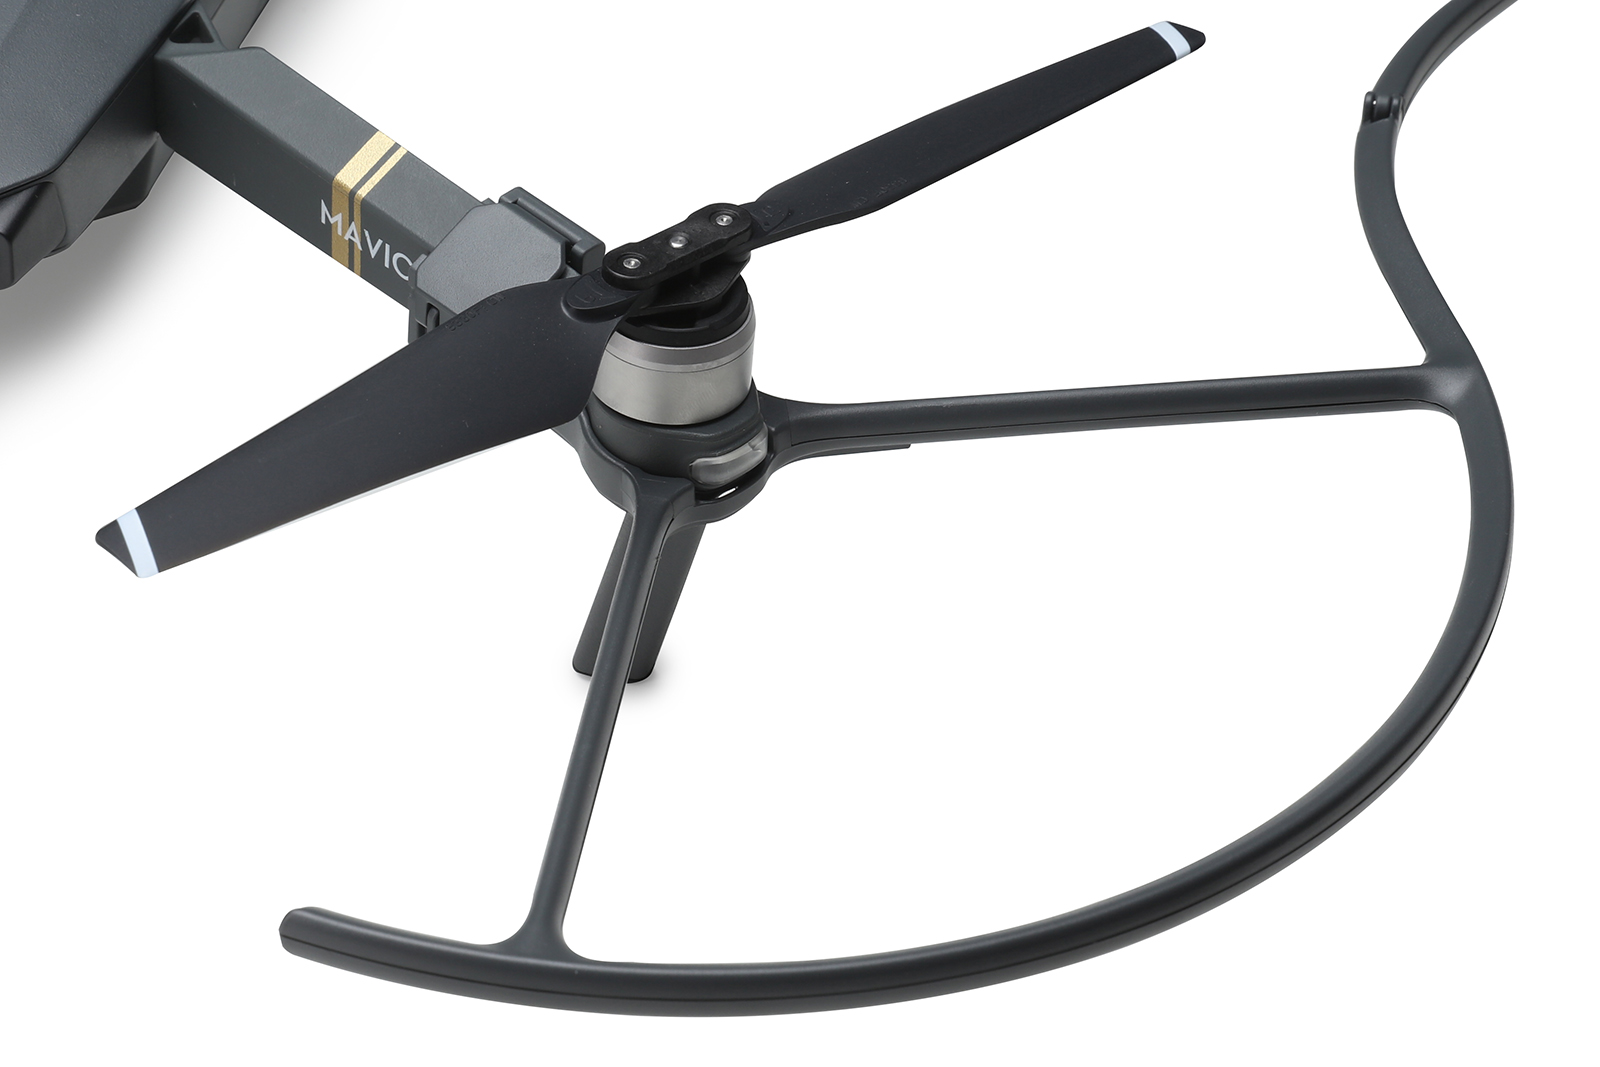 dji launches mavic pro accessories arm with propeller guard